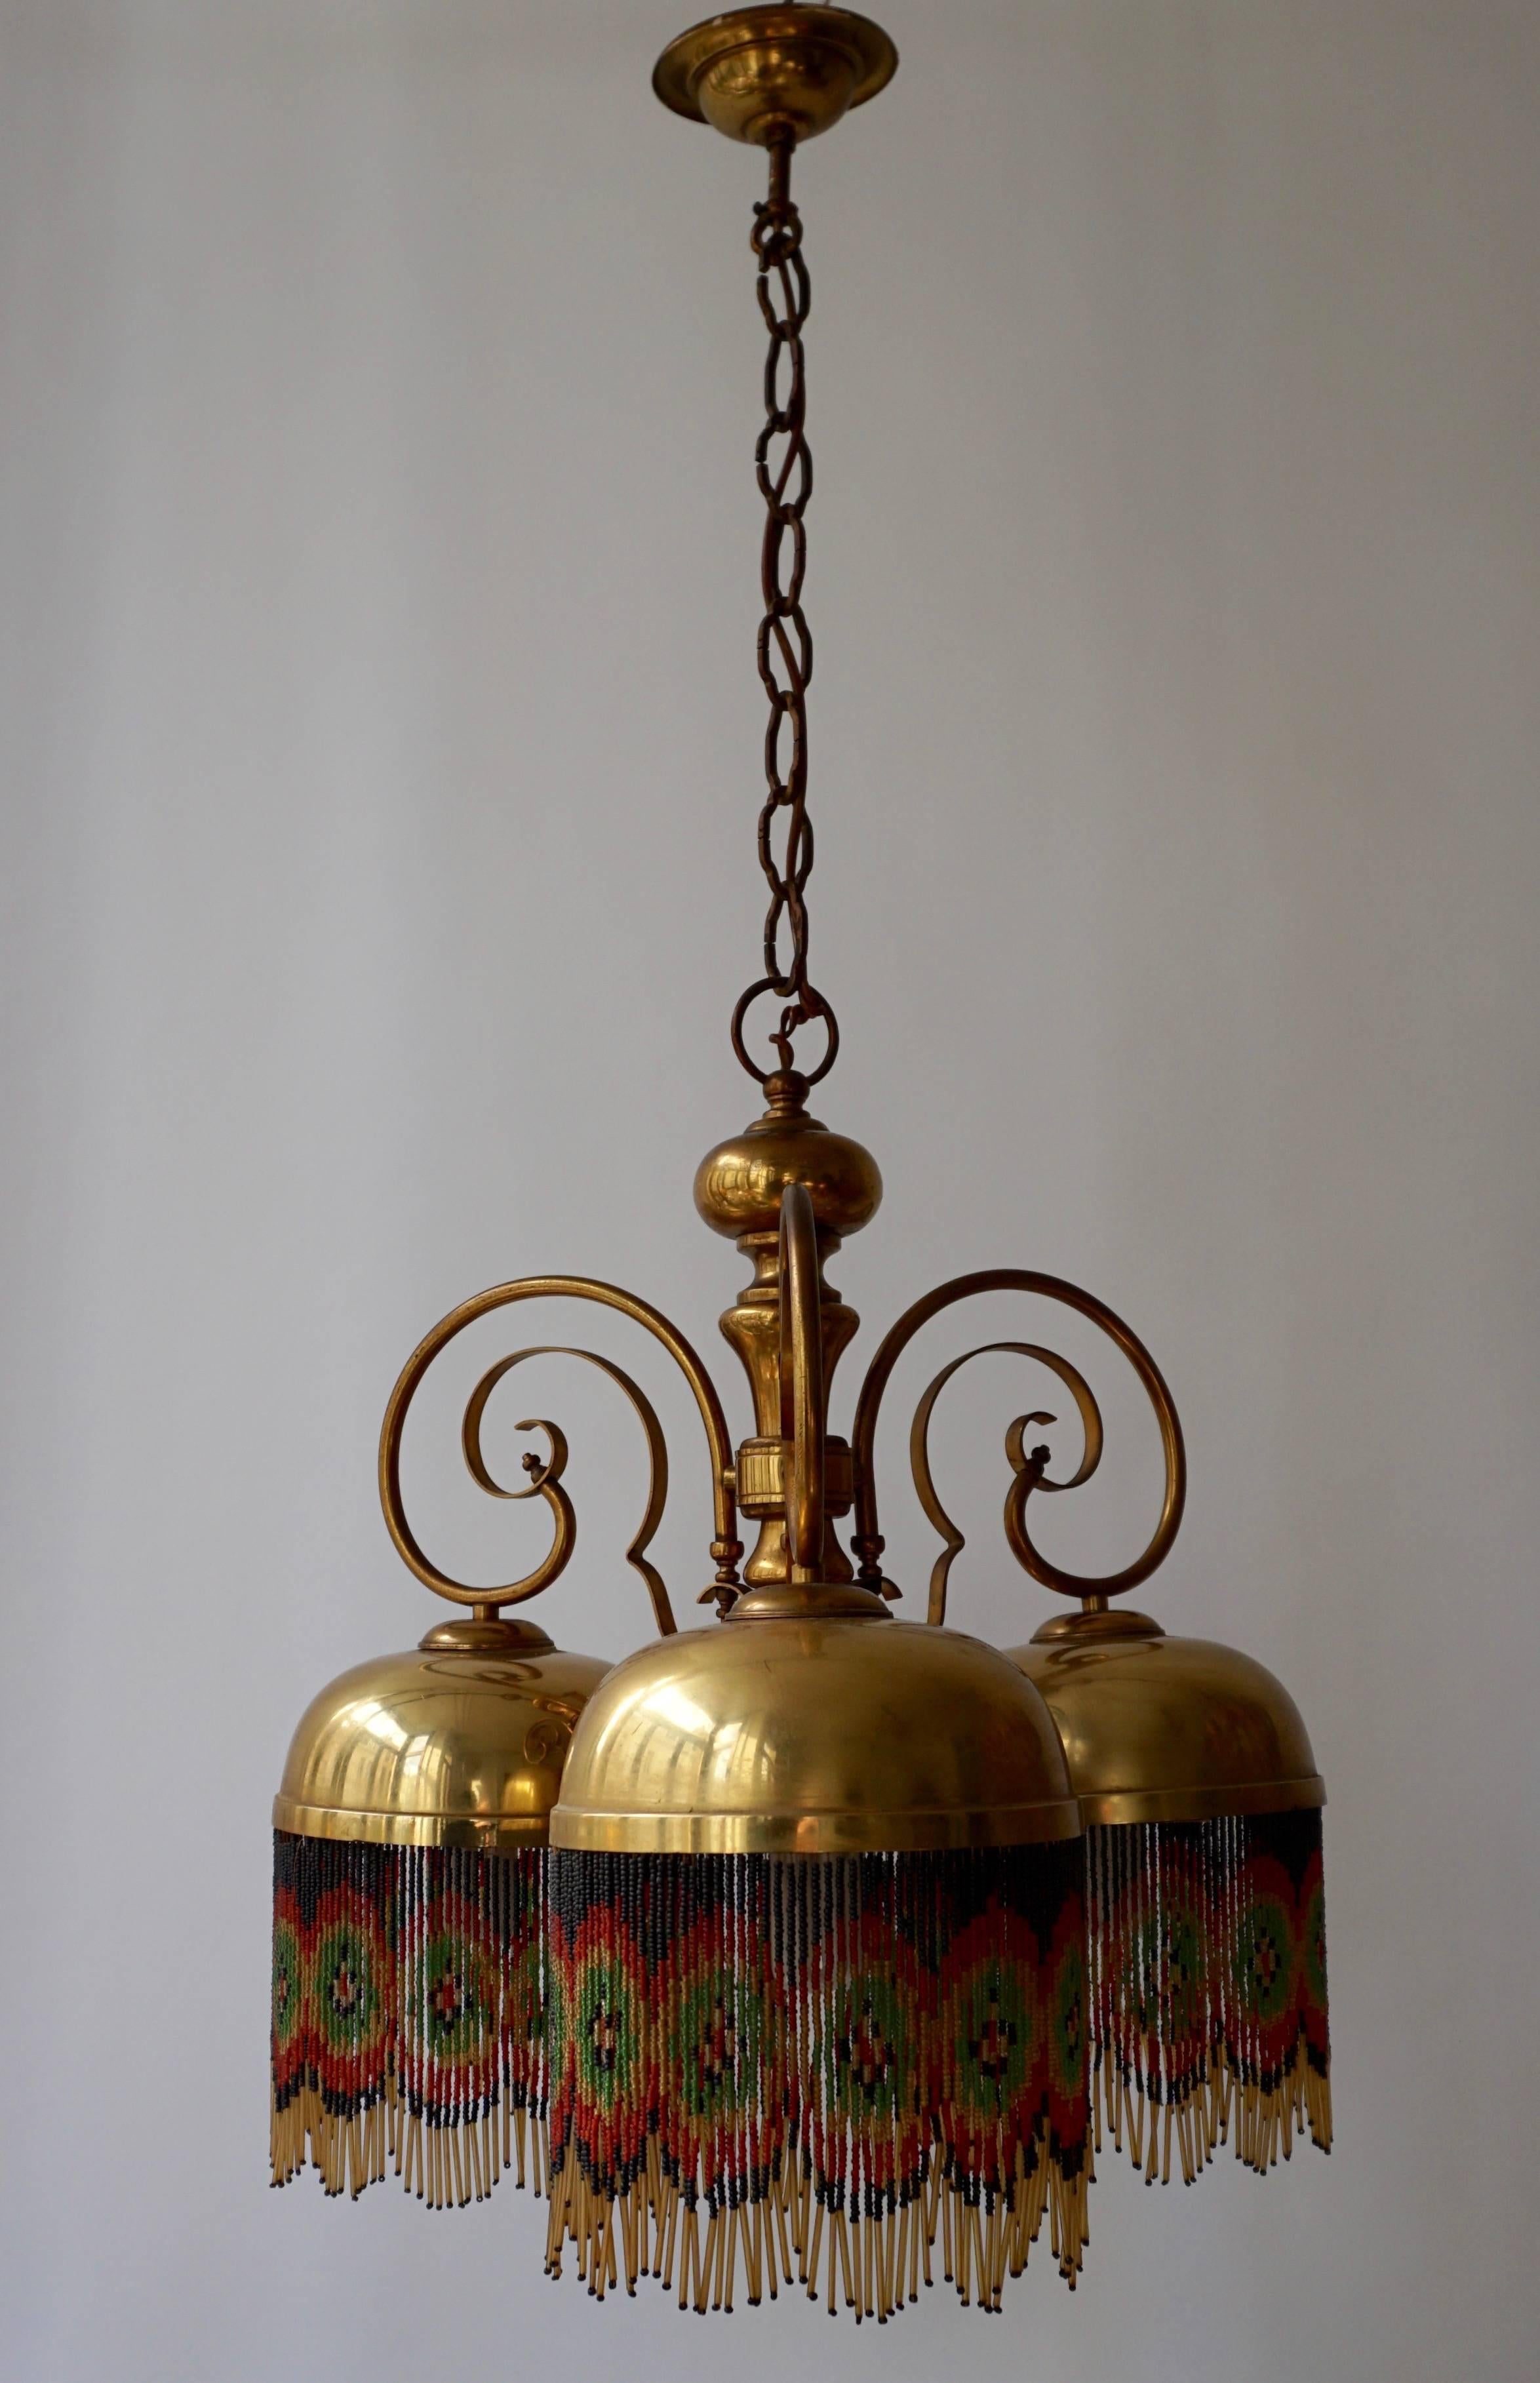 Italian copper and glass chandelier.
Diameter: 46 cm.
Height fixture 50 cm.
Total height with the chain 95 cm.